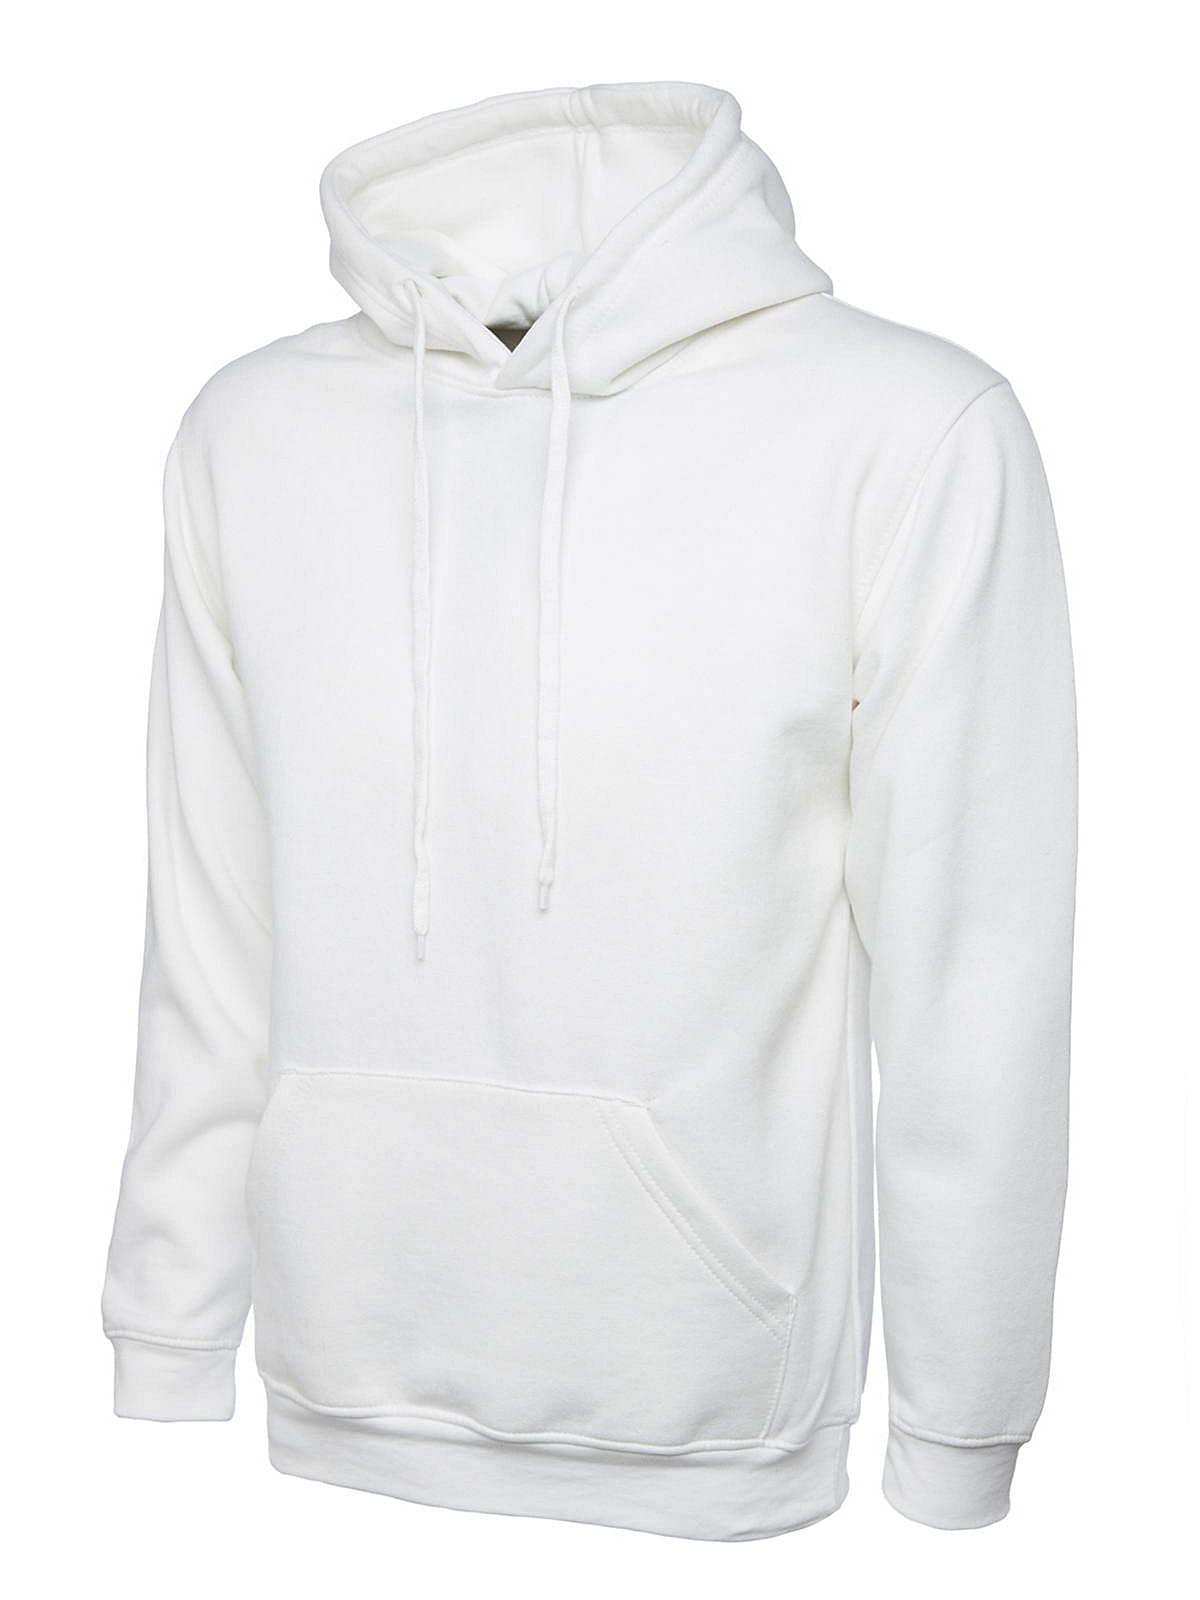 Uneek 300GSM Classic Hoodie in White (Product Code: UC502)